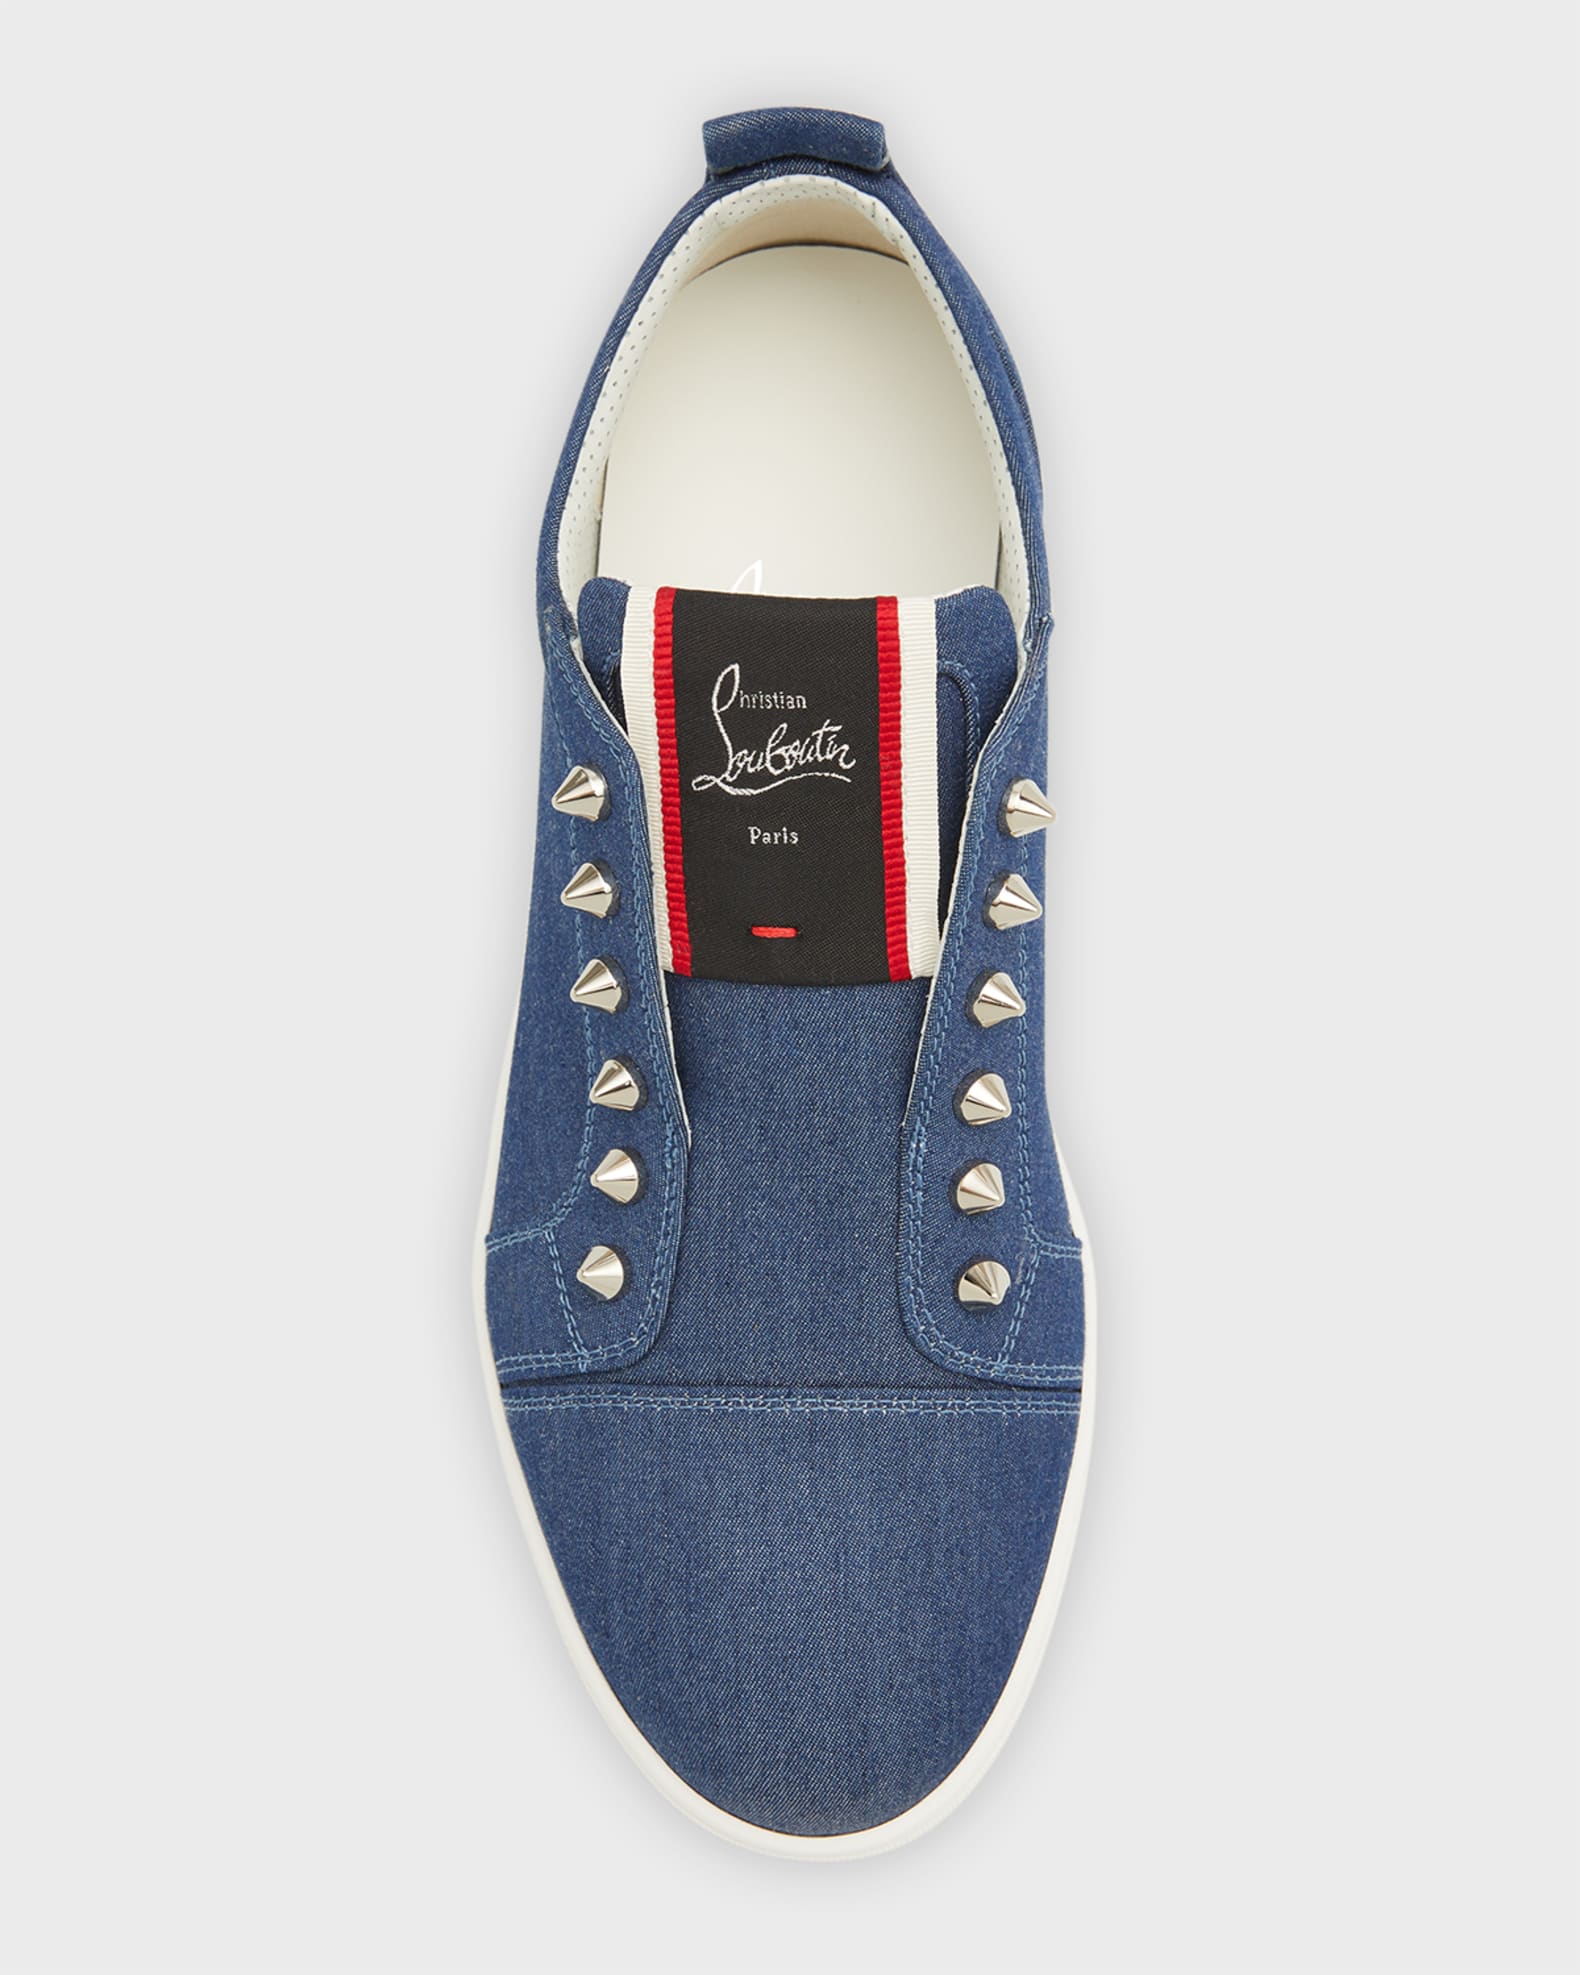 Christian Louboutin Men's Fique A Vontade Red Sole Denim Slip-On Sneakers, Blue, Men's, 11D, Sneakers & Trainers Slip-On Sneakers